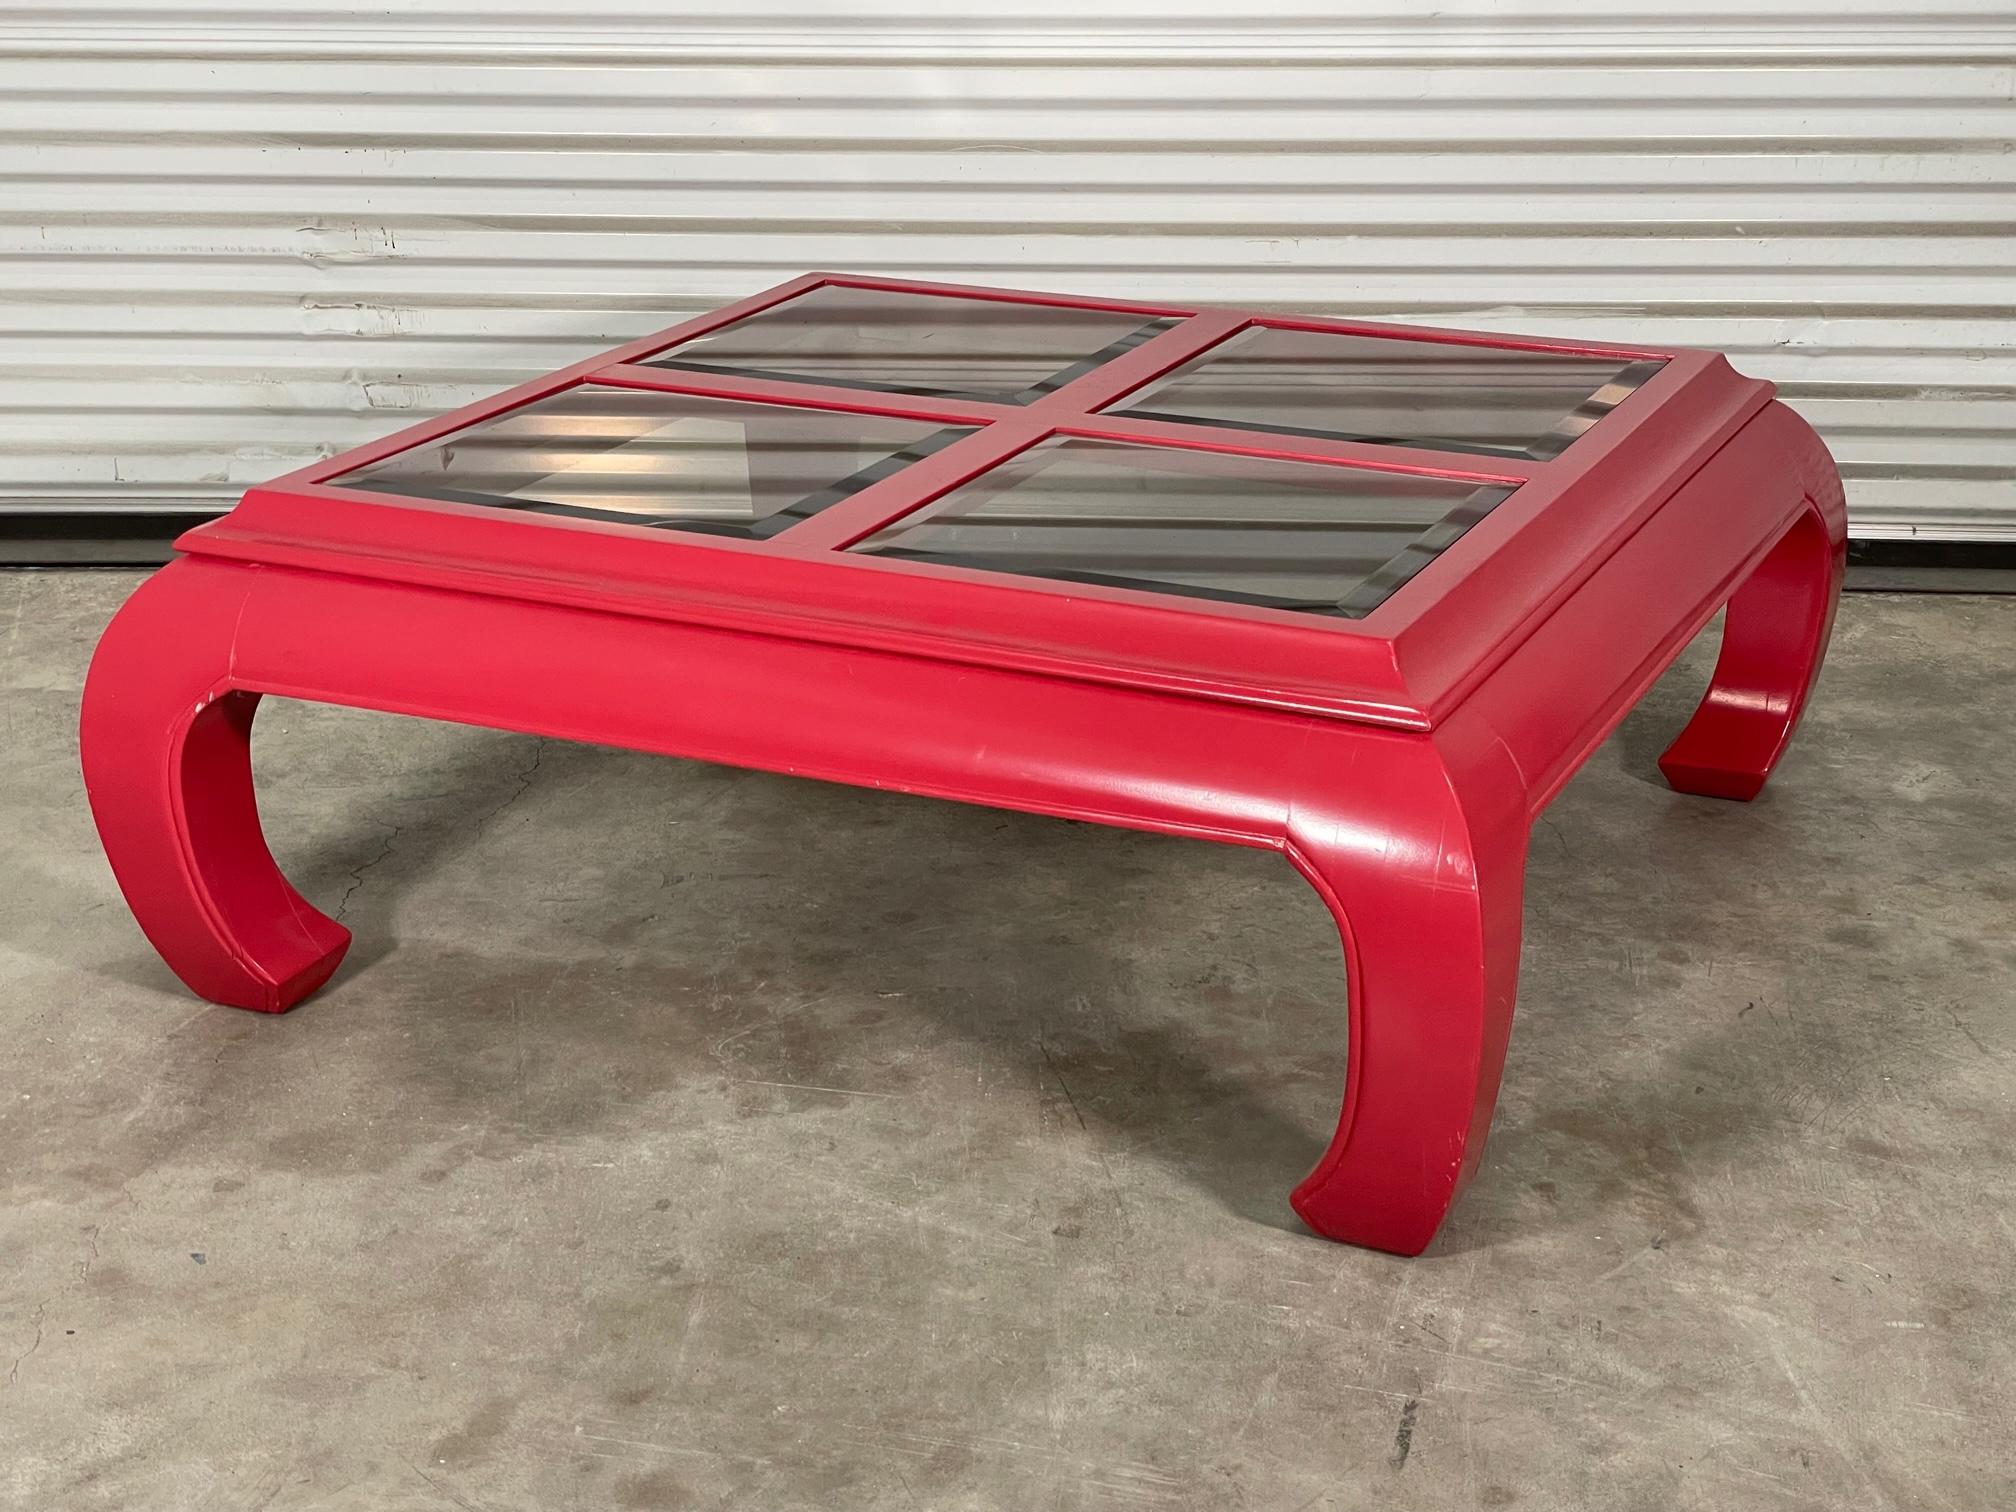 Ming Asian style coffee table features smoked beveled glass inserts and red high gloss lacquer finish. Good condition with minor imperfections to the newly lacquered finish, see photos for condition details.

